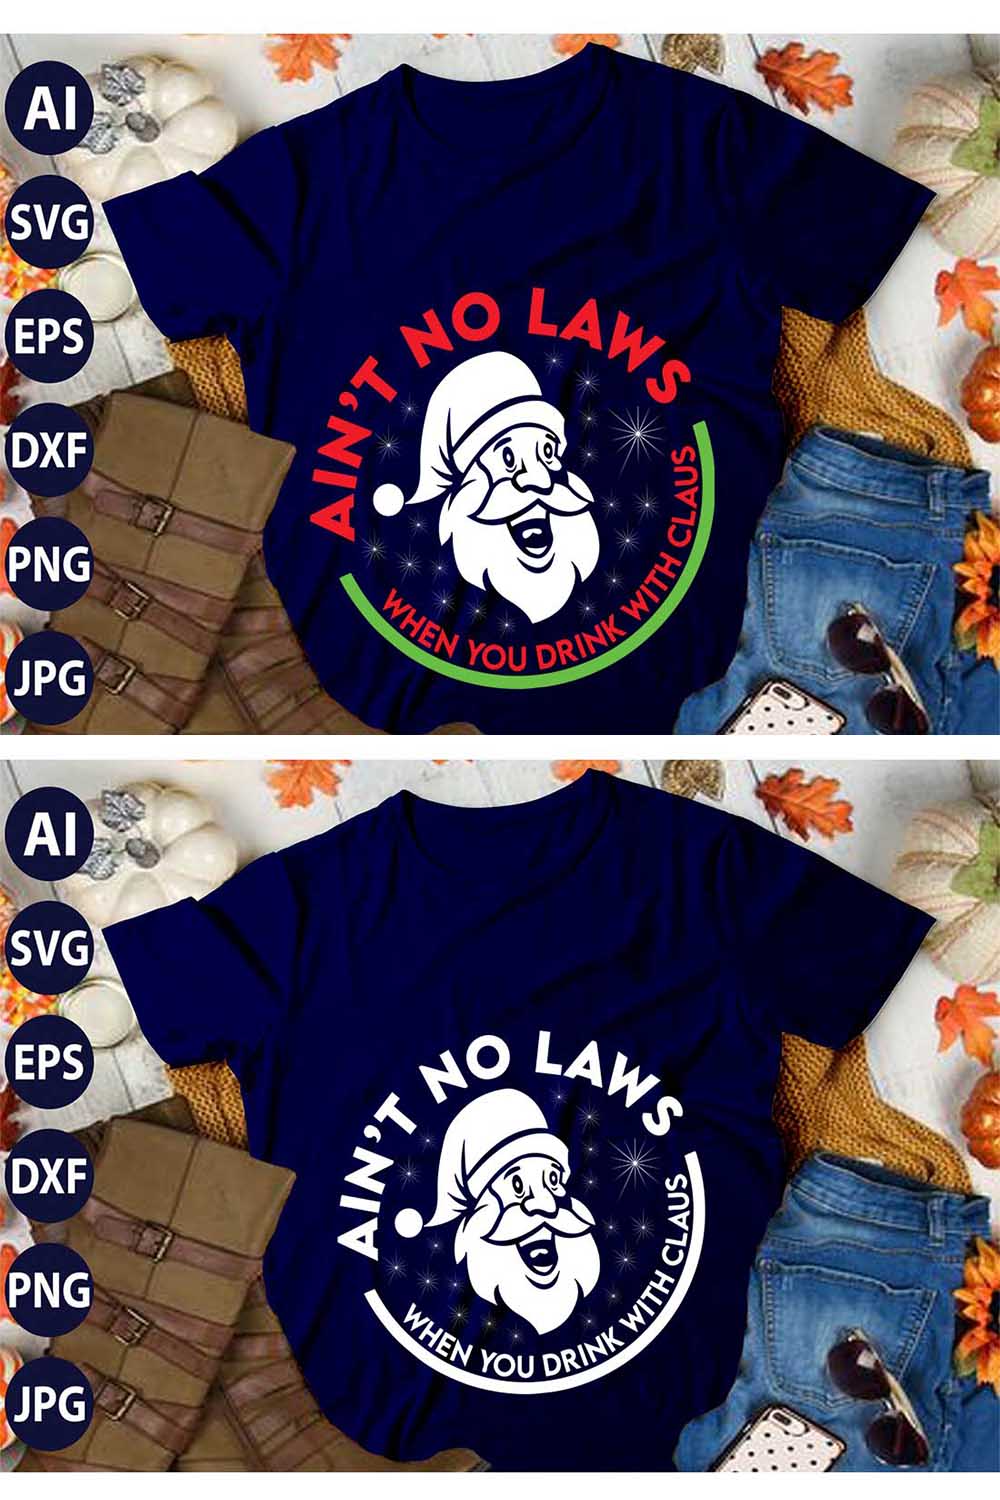 Ain’t No Laws When You’re Santa Clau, SVG T-Shirt Design |Christmas Retro It's All About Jesus Typography Tshirt Design | Ai, Svg, Eps, Dxf, Jpeg, Png, Instant download T-Shirt | 100% print-ready Digital vector file pinterest preview image.